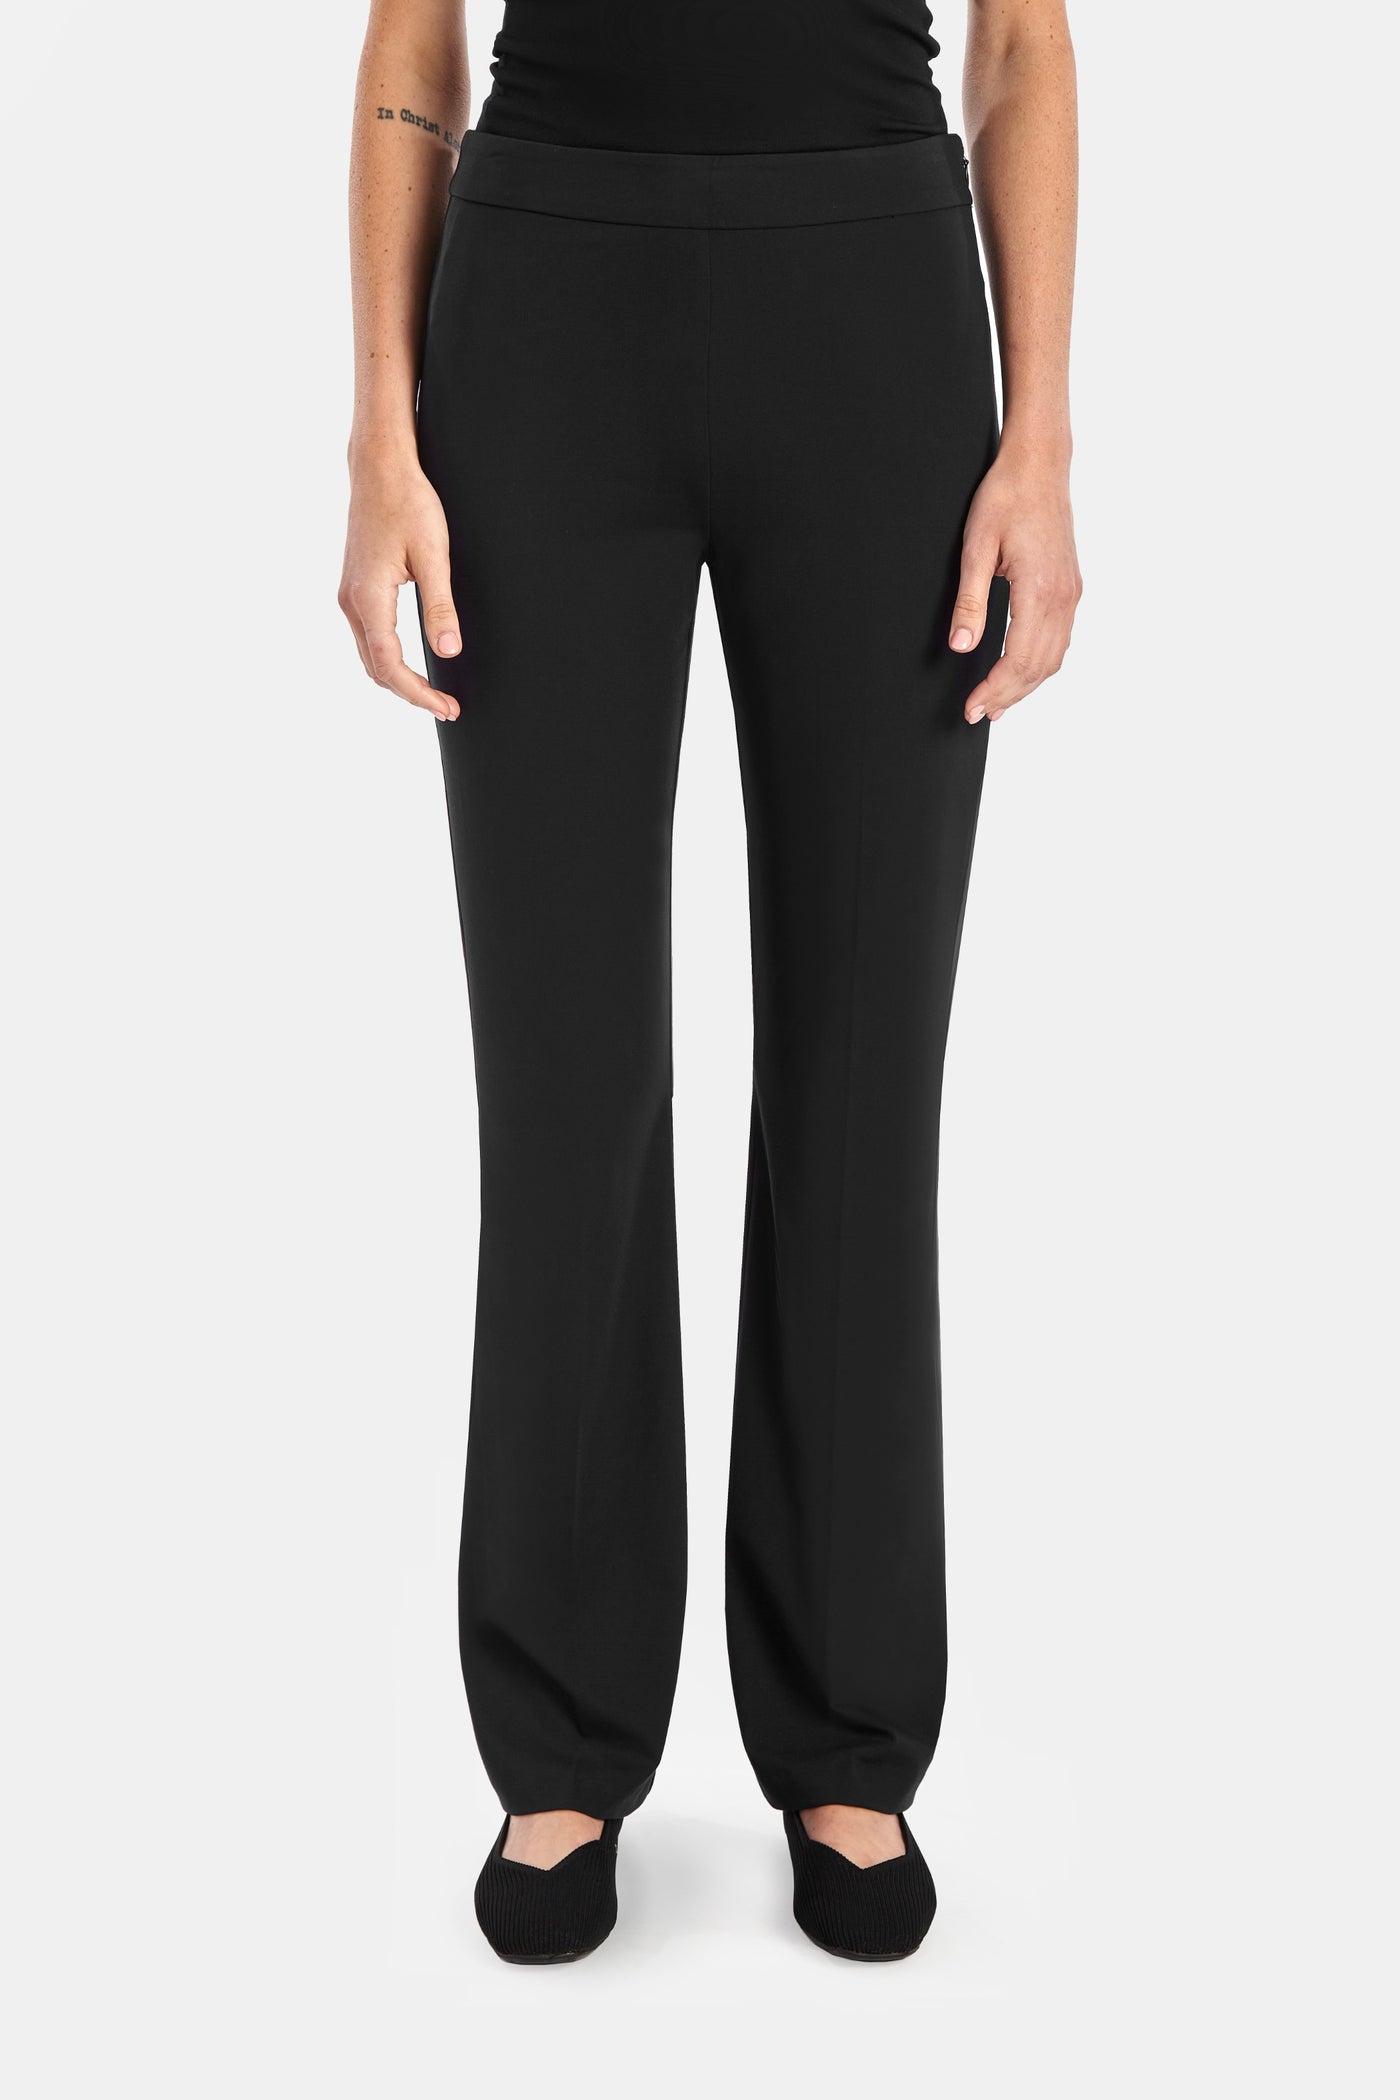 THE HALO PANT